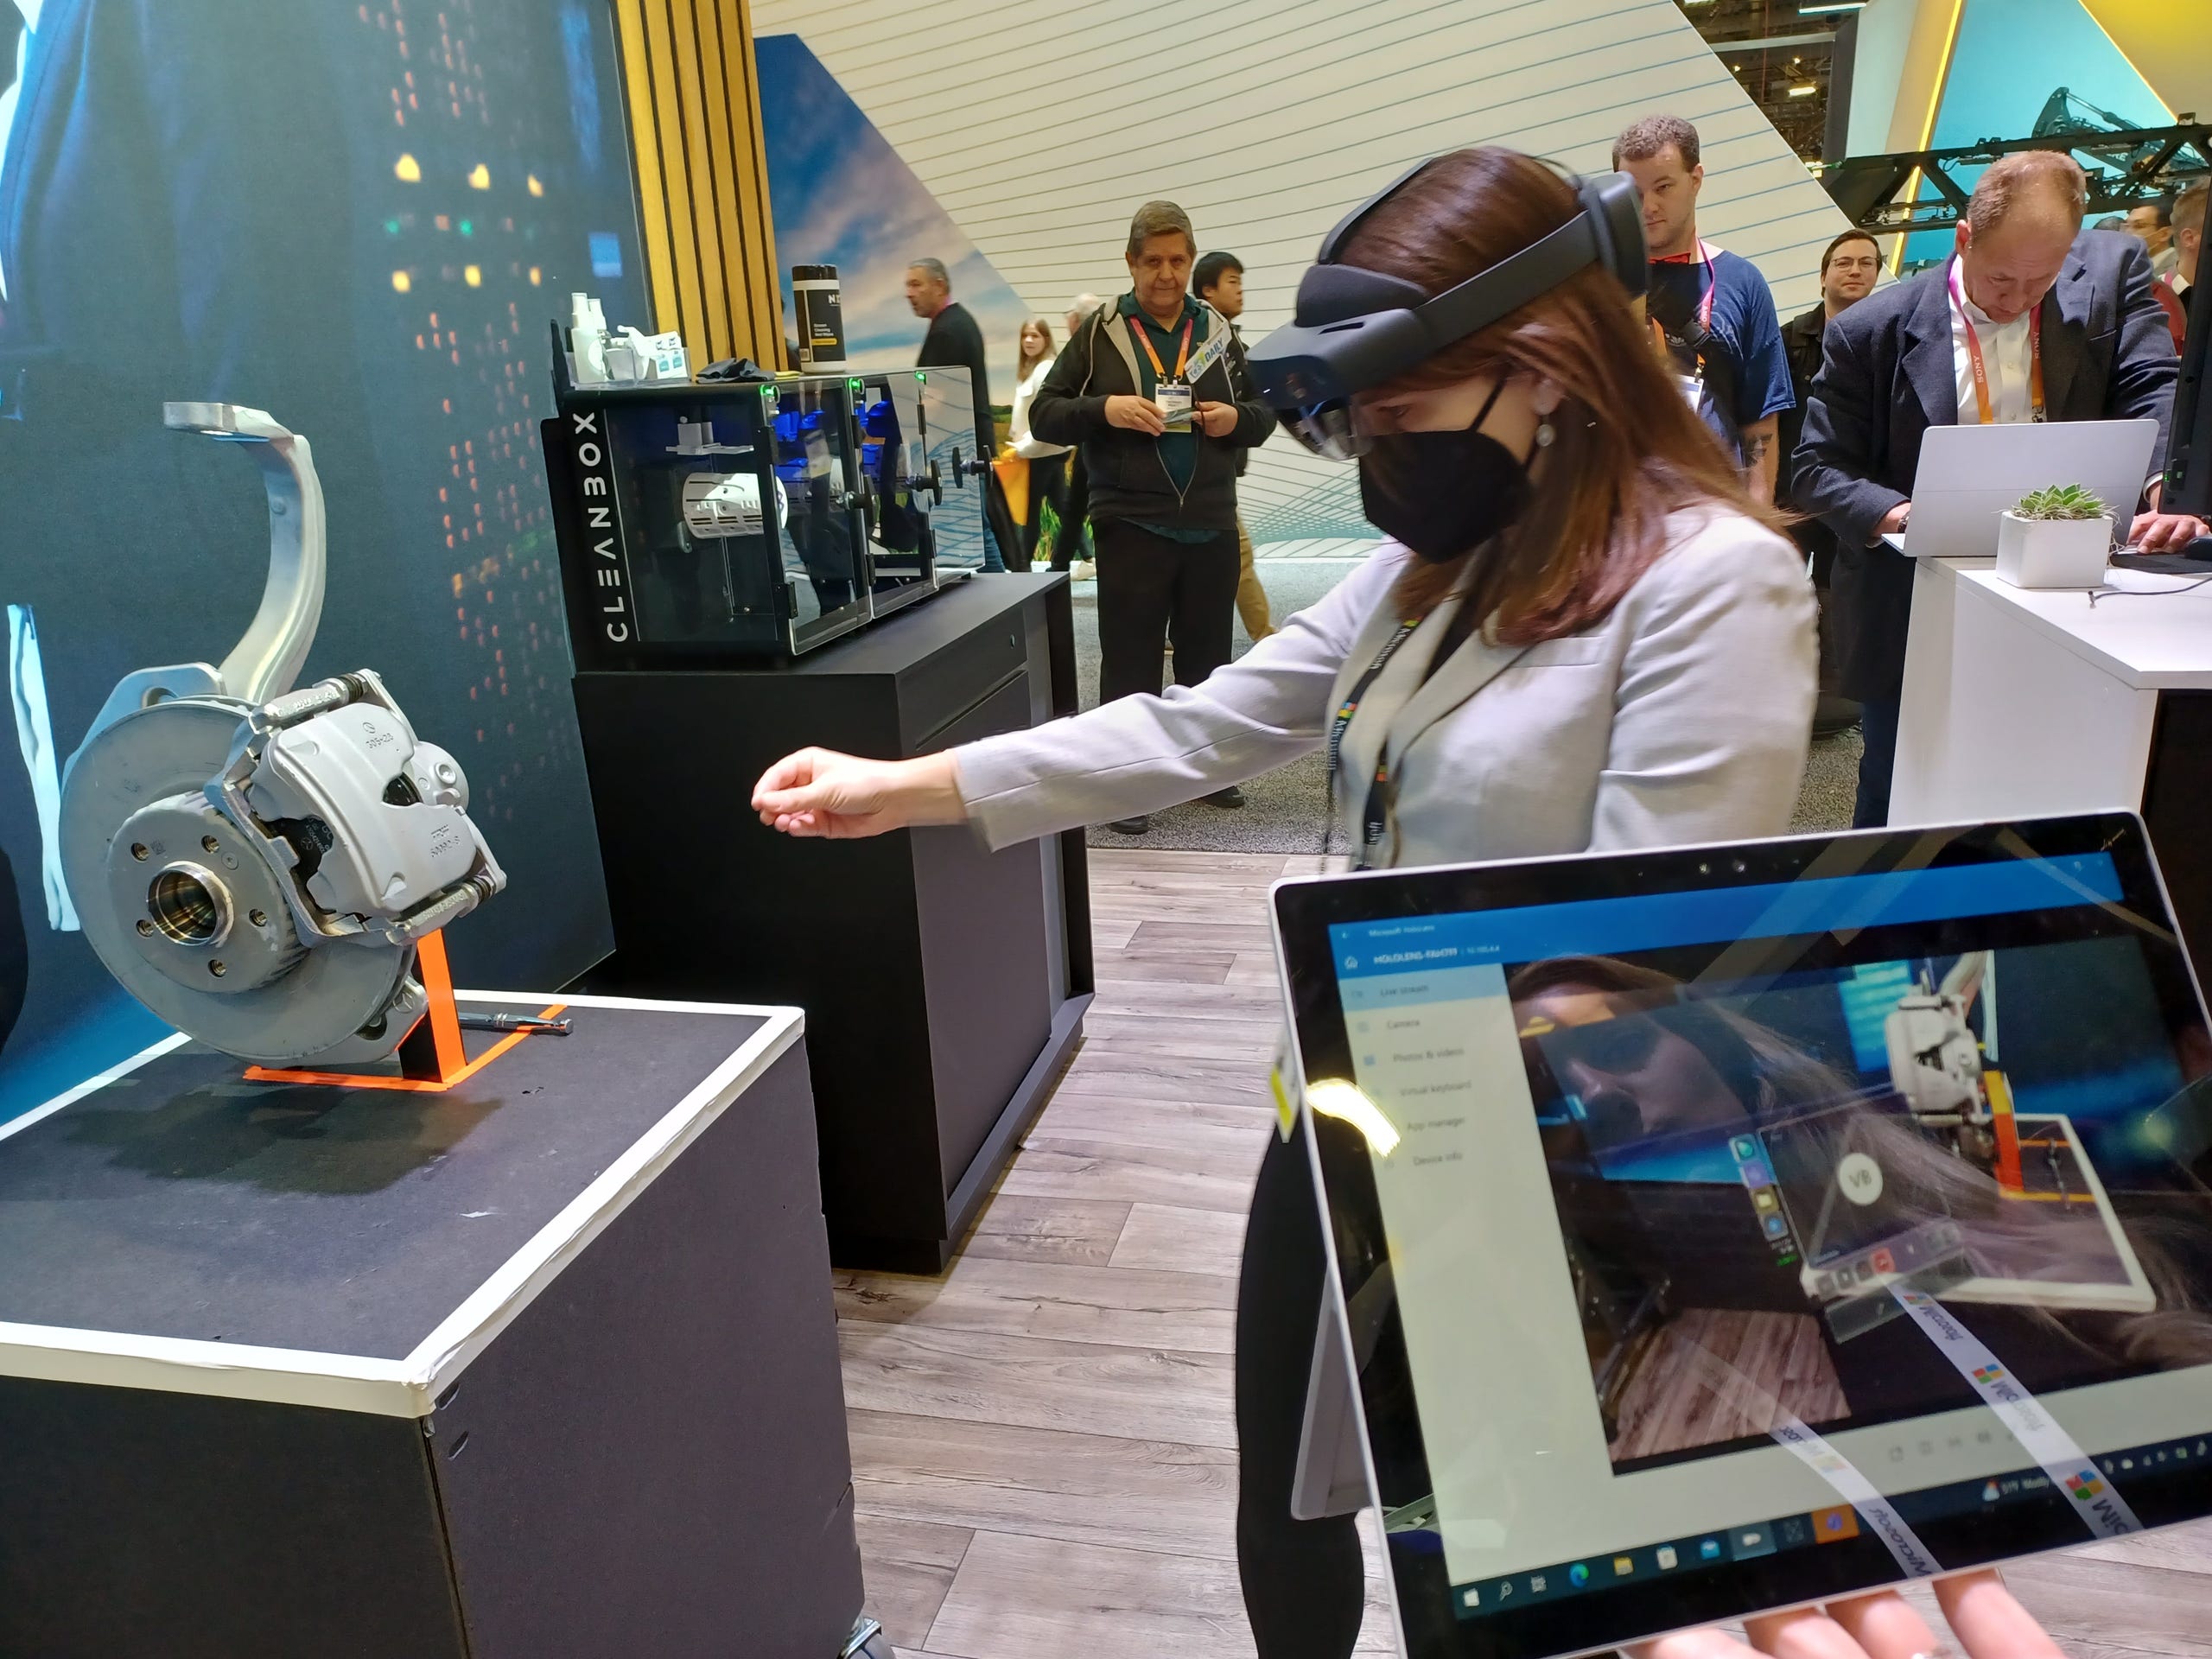 Juliette Weiss, design guide for Microsoft Dynamics 365, demonstrates the company's mixed reality technology using the HoloLens that allows vehicle technicians to connect remotely with engineers.